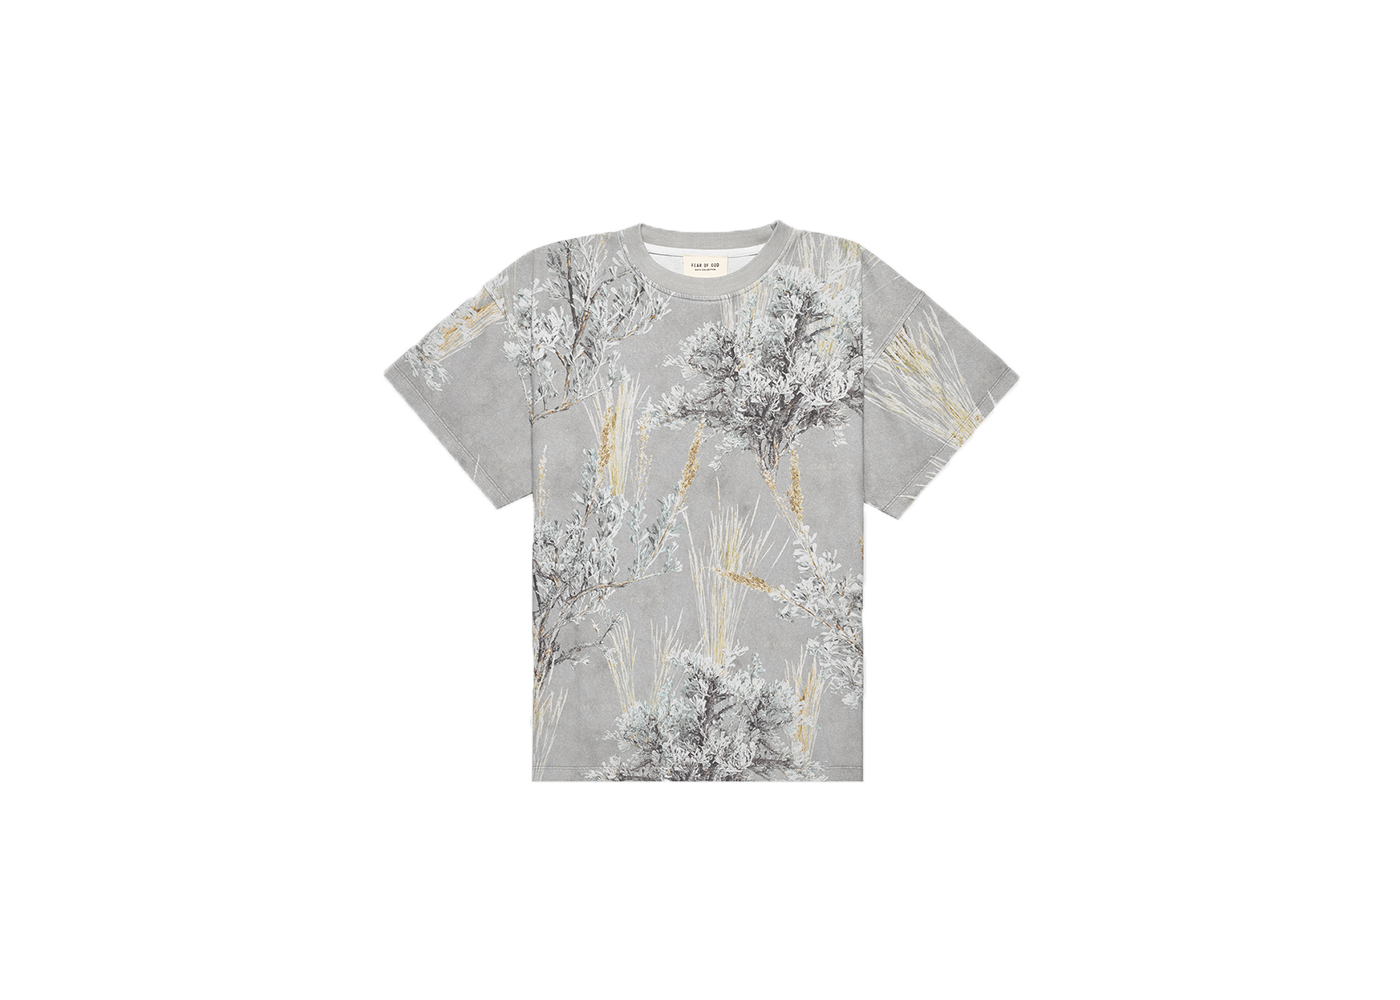 FEAR OF GOD Printed T-Shirt Prairie Ghost Camo - Sixth Collection - US